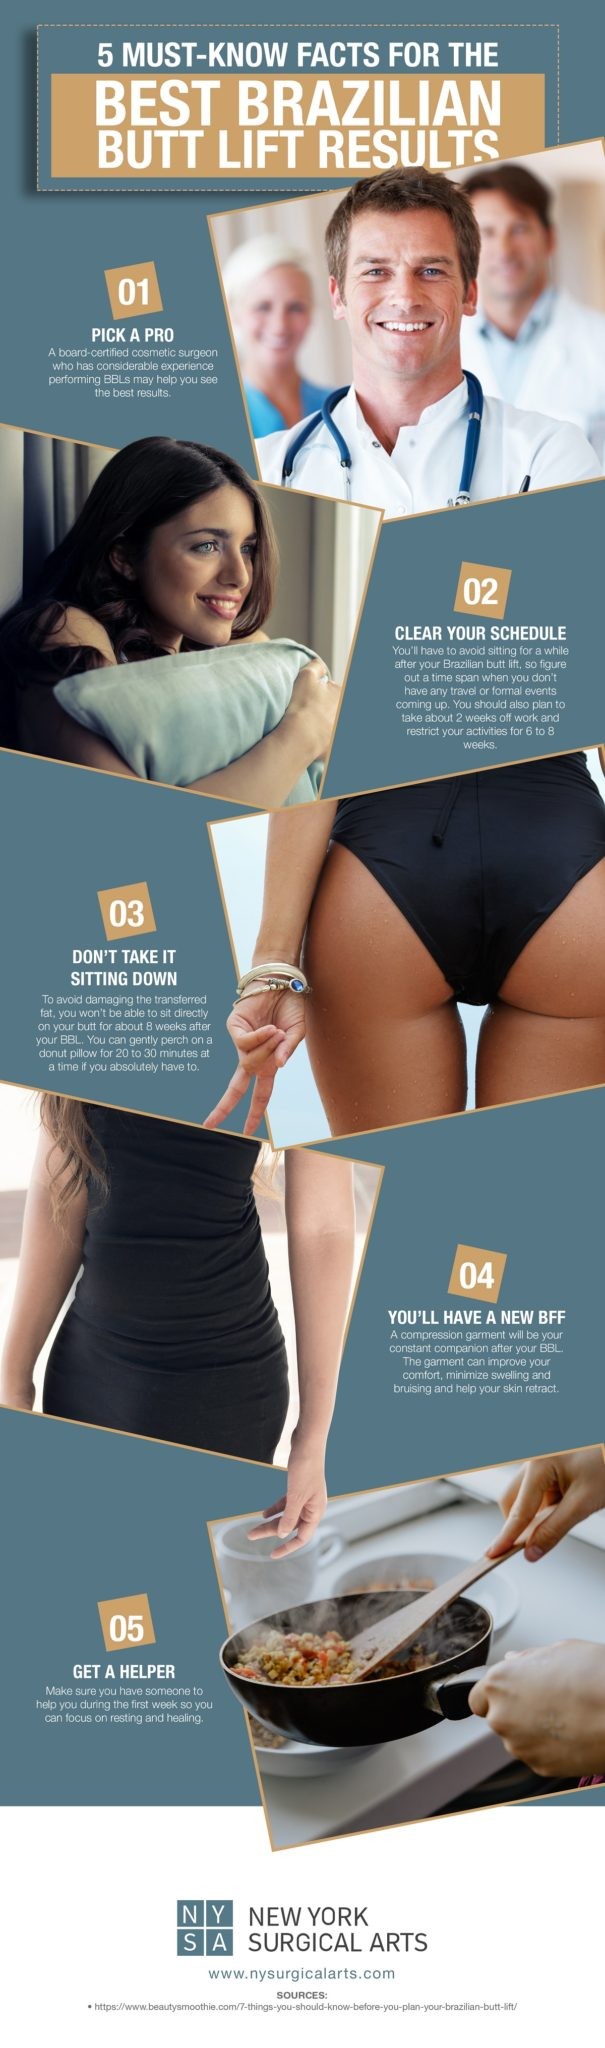 5 Must-Know Facts for the Best Brazilian Butt Lift Results [Infographic]